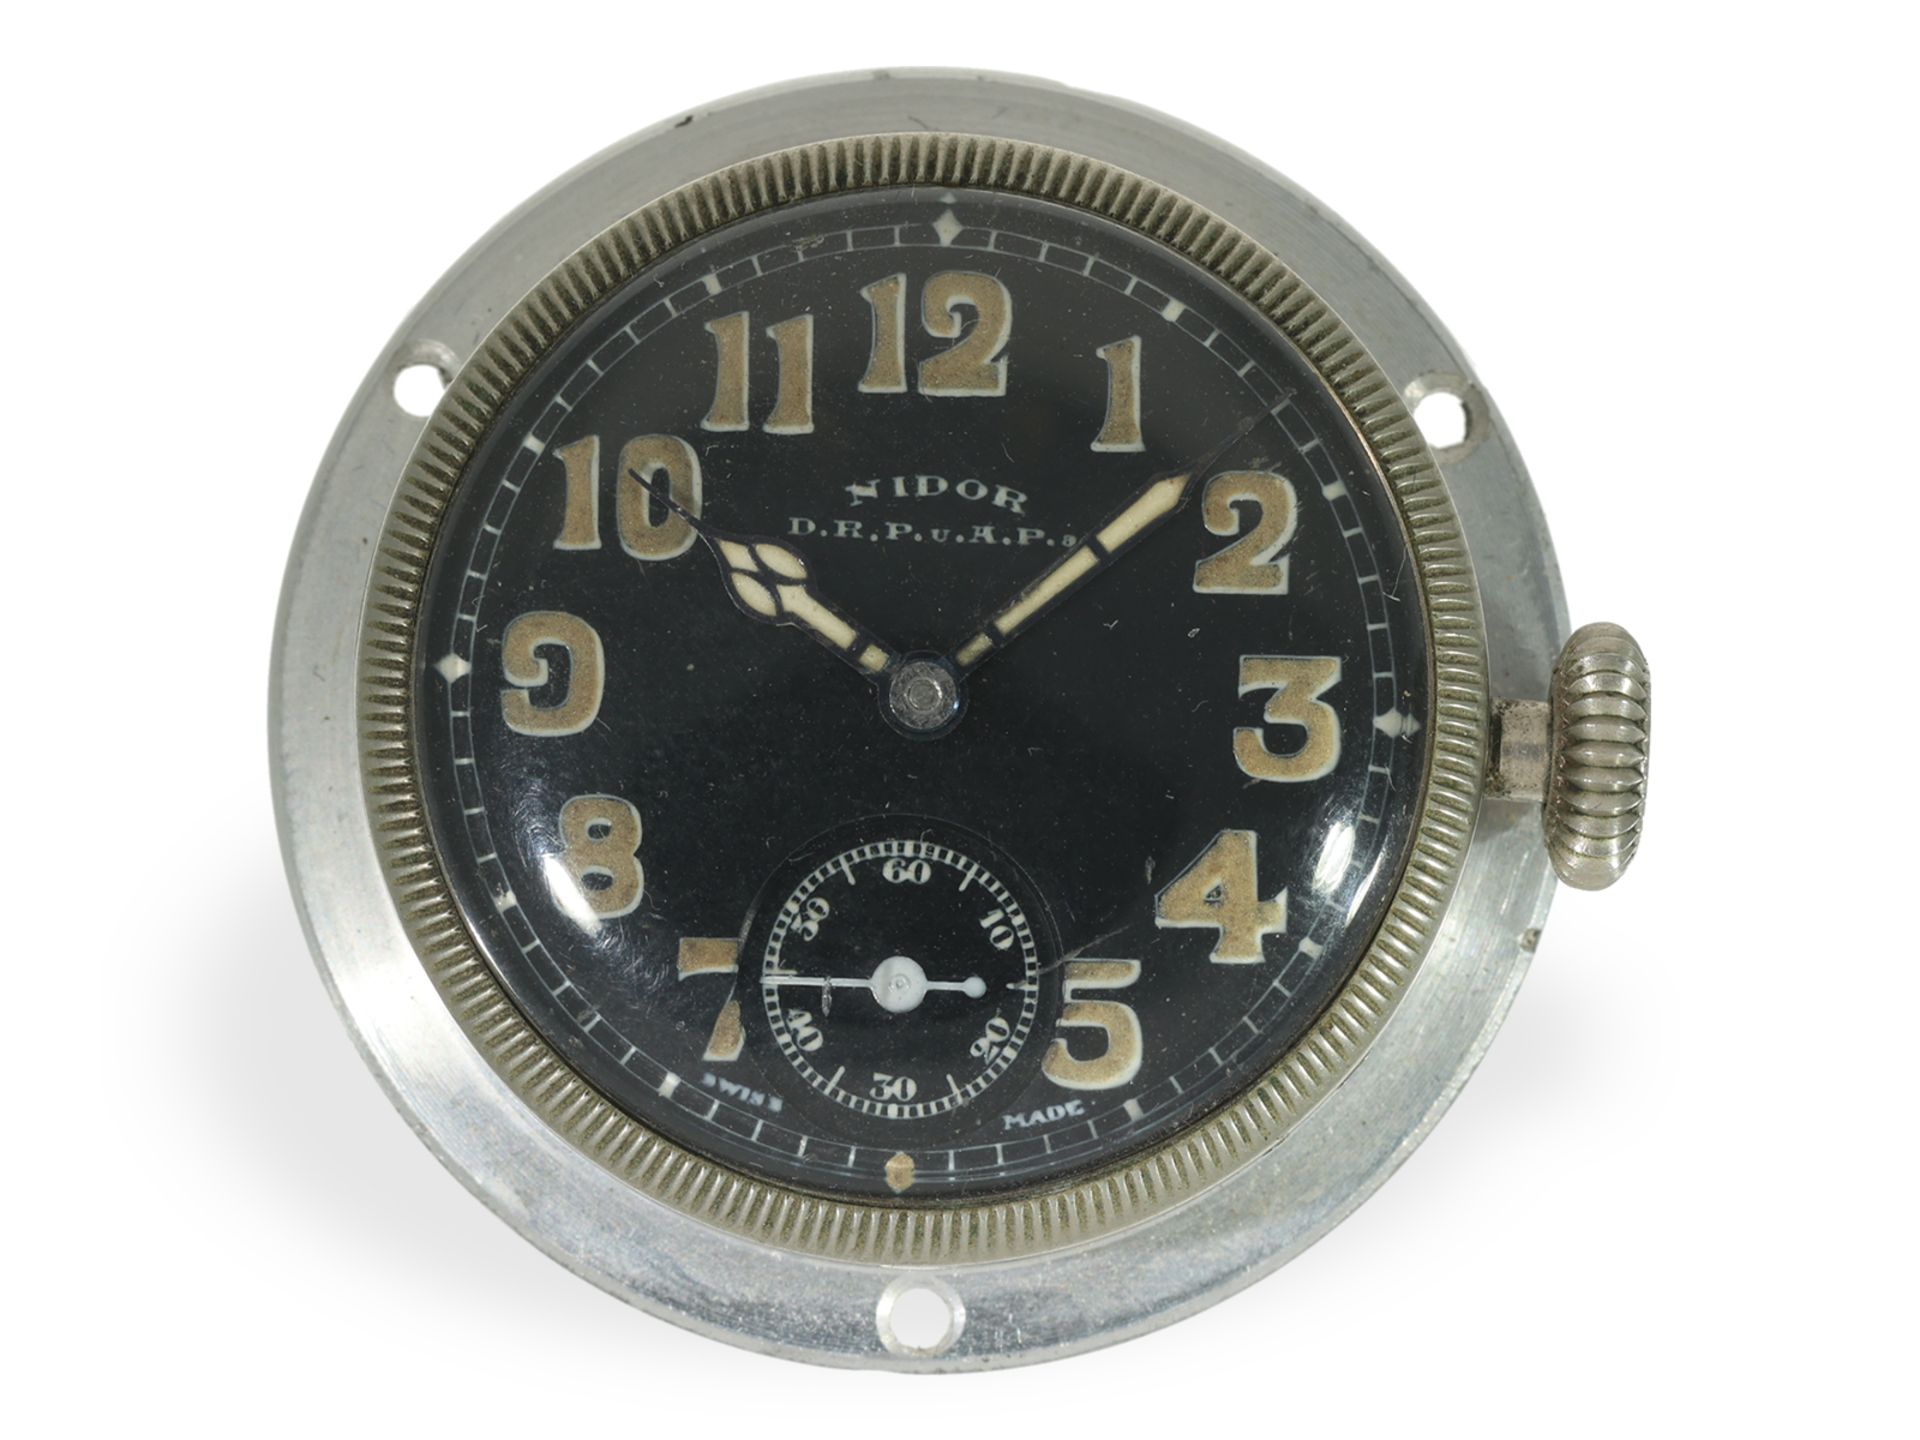 Pilot's watch/board watch: extremely rare Nidor pilot's watch from the Second World War